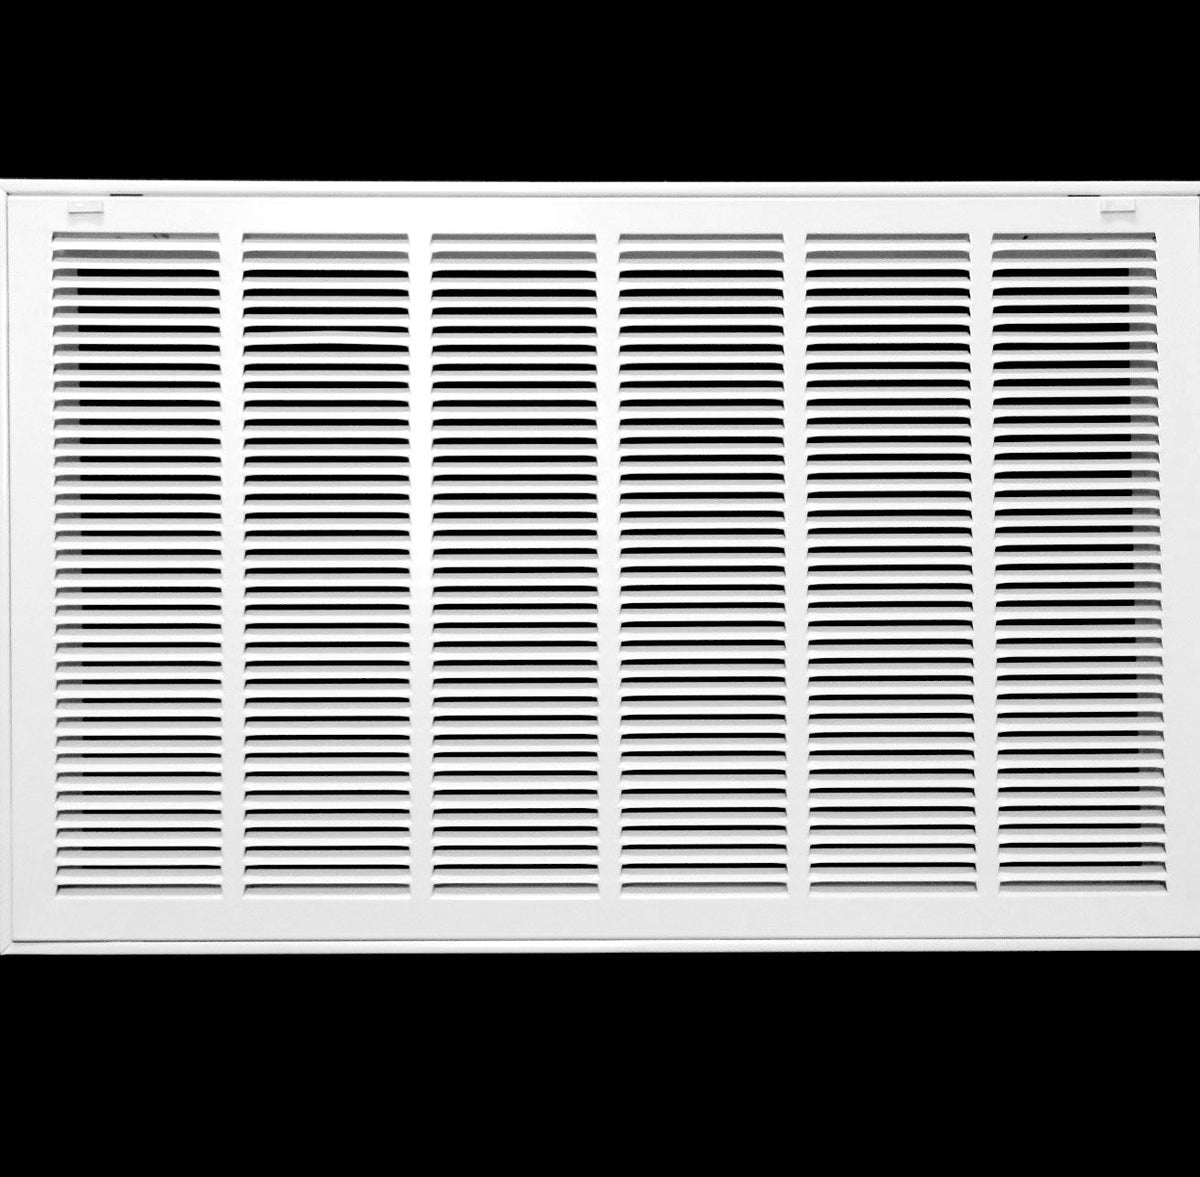 34&quot; X 20&quot; Steel Return Air Filter Grille for 1&quot; Filter - Removable Frame - [Outer Dimensions: 36 5/8&quot; X 22 5/8&quot;]